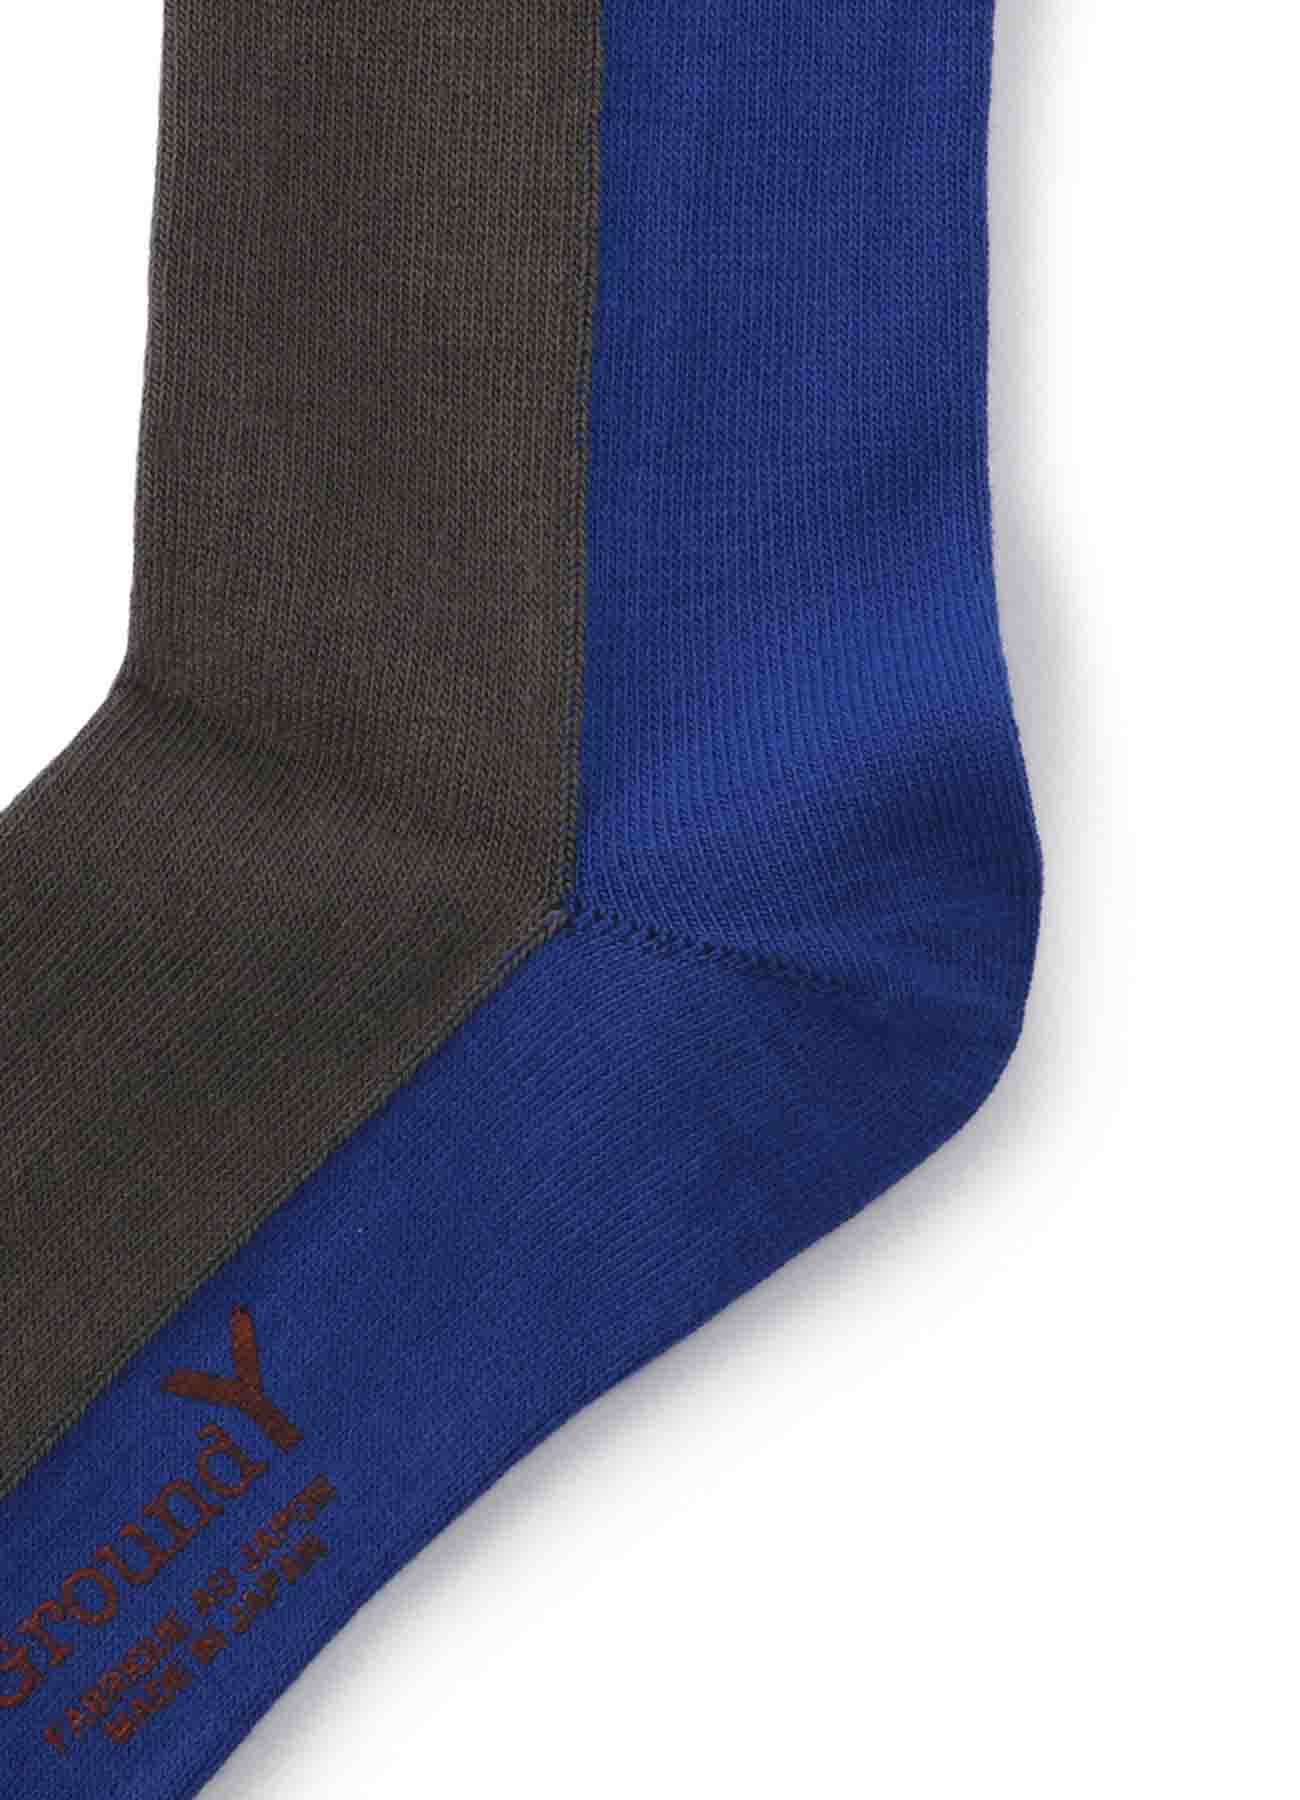 FRONT AND BACK TWO COLOR SOCKS